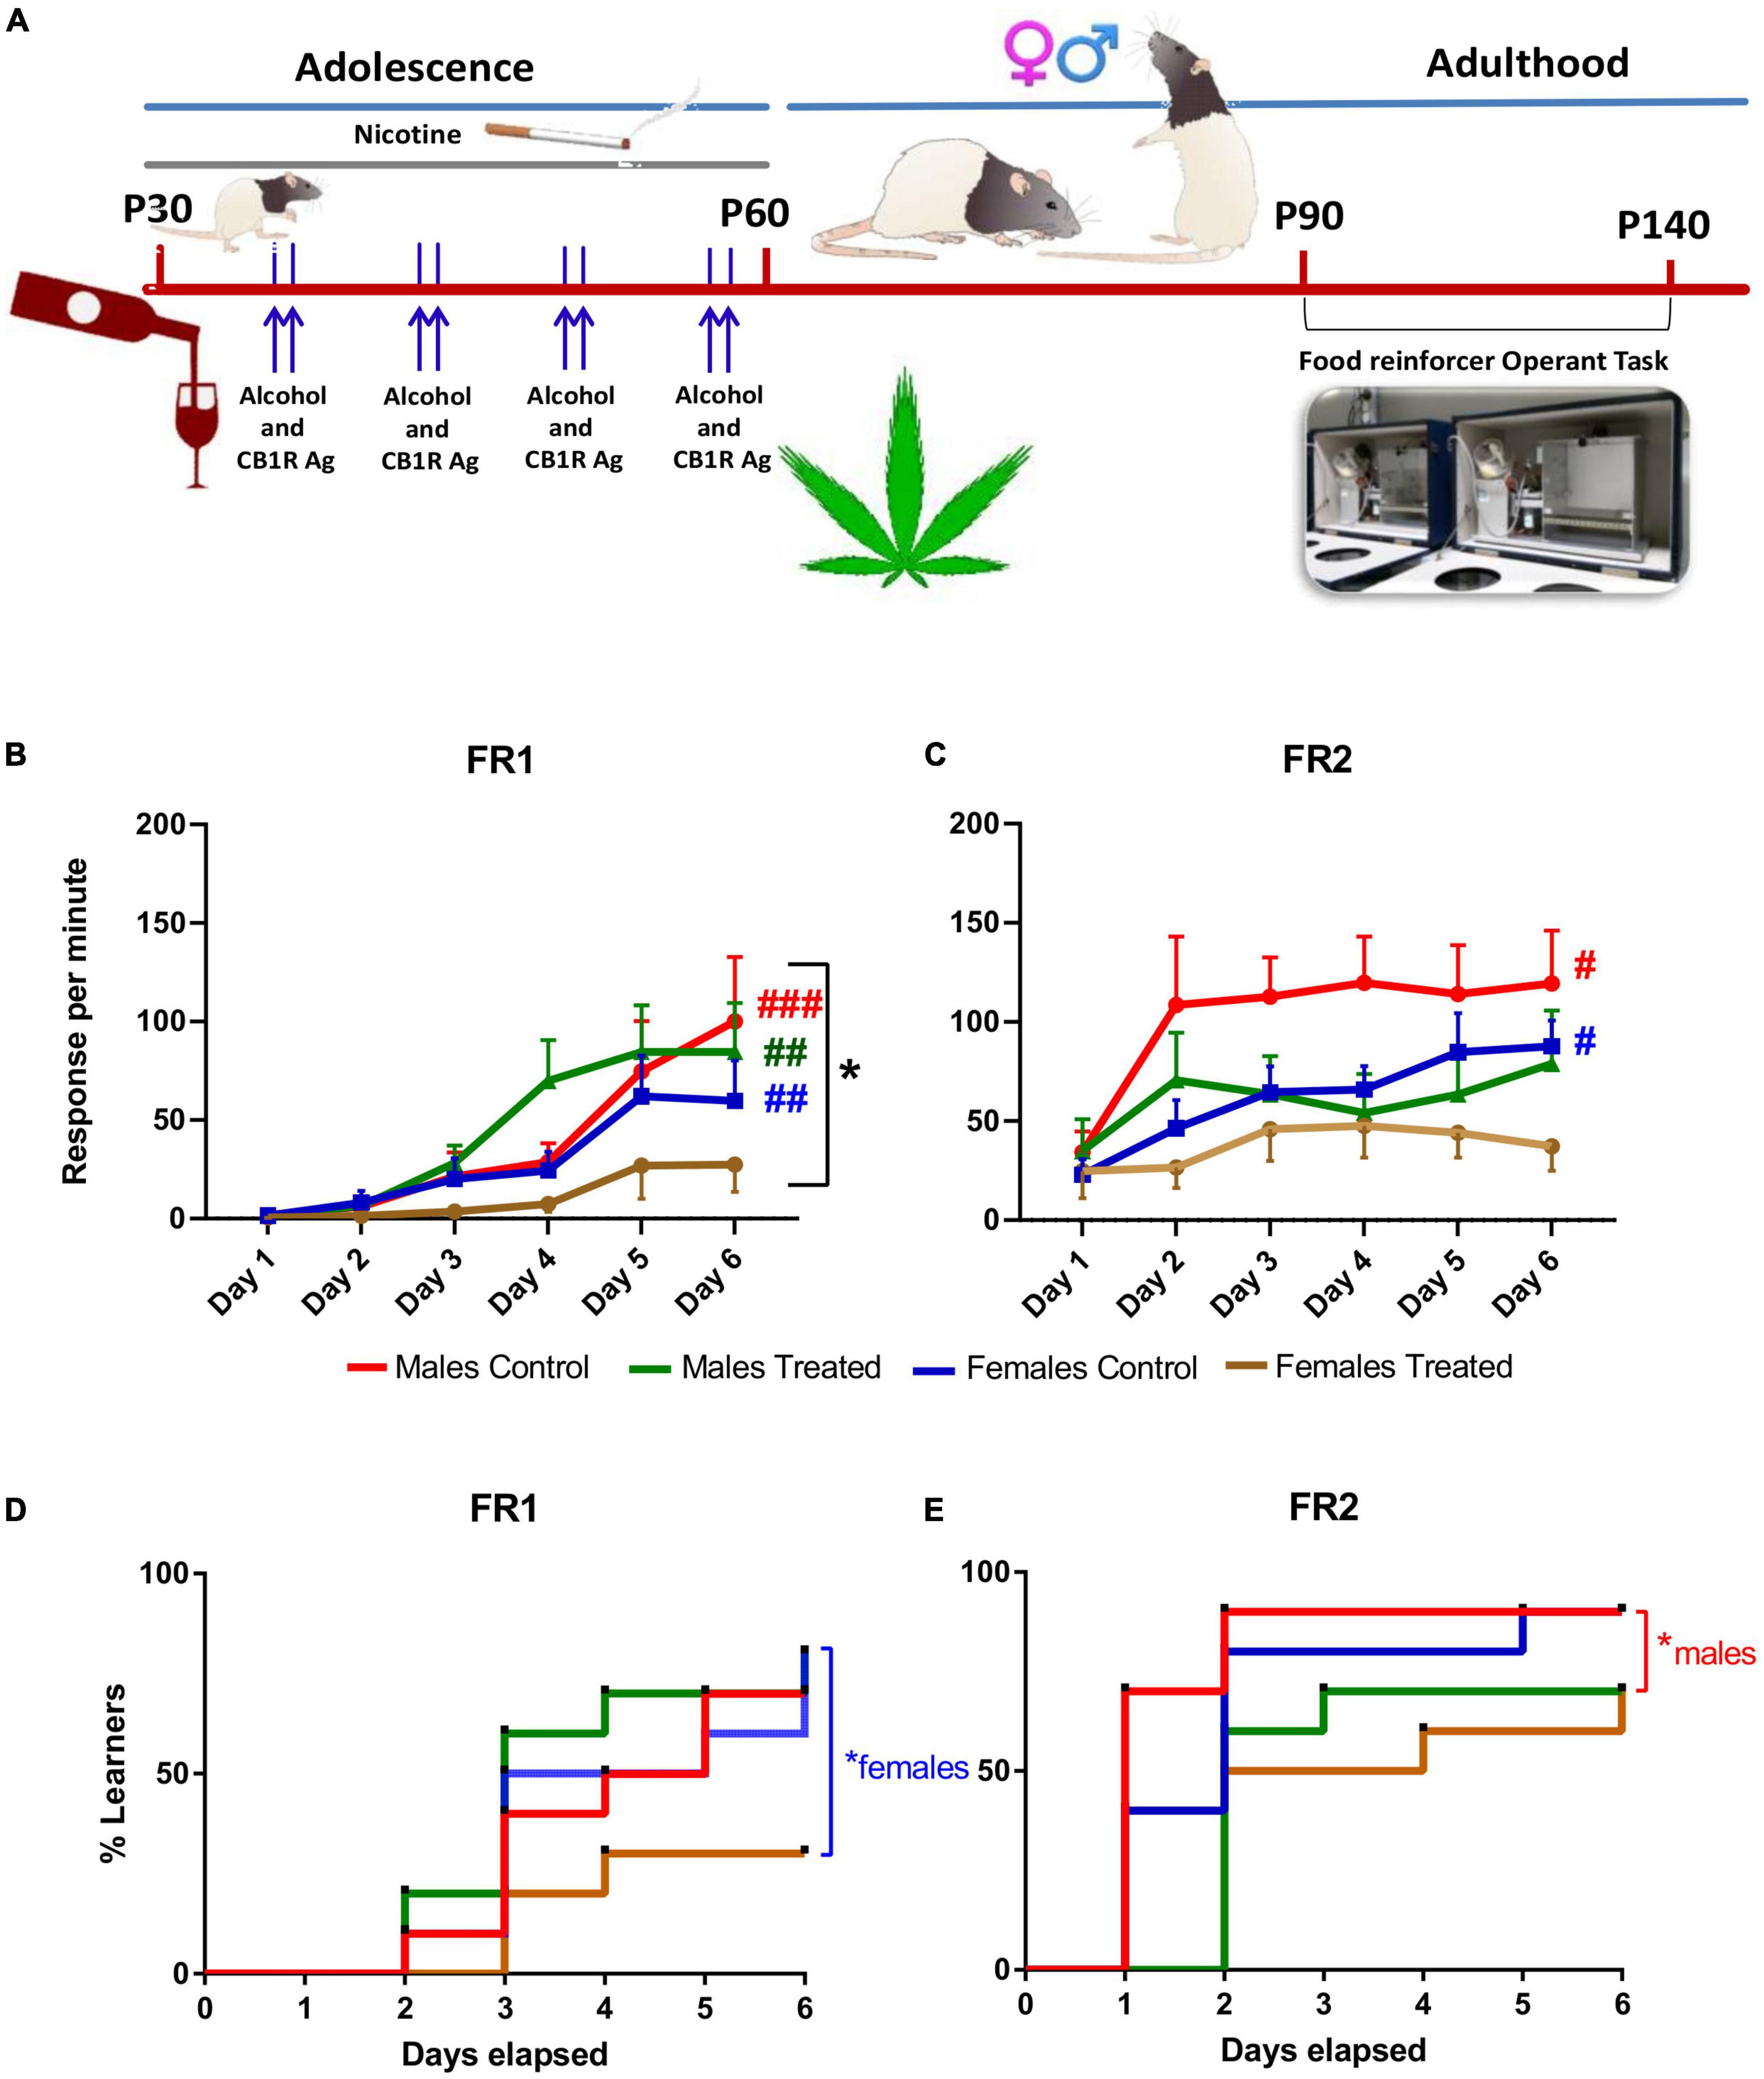 Alcohol and cannabinoid binges and daily exposure to nicotine in adolescent/young adult rats induce sex-dependent long-term appetitive instrumental learning impairment